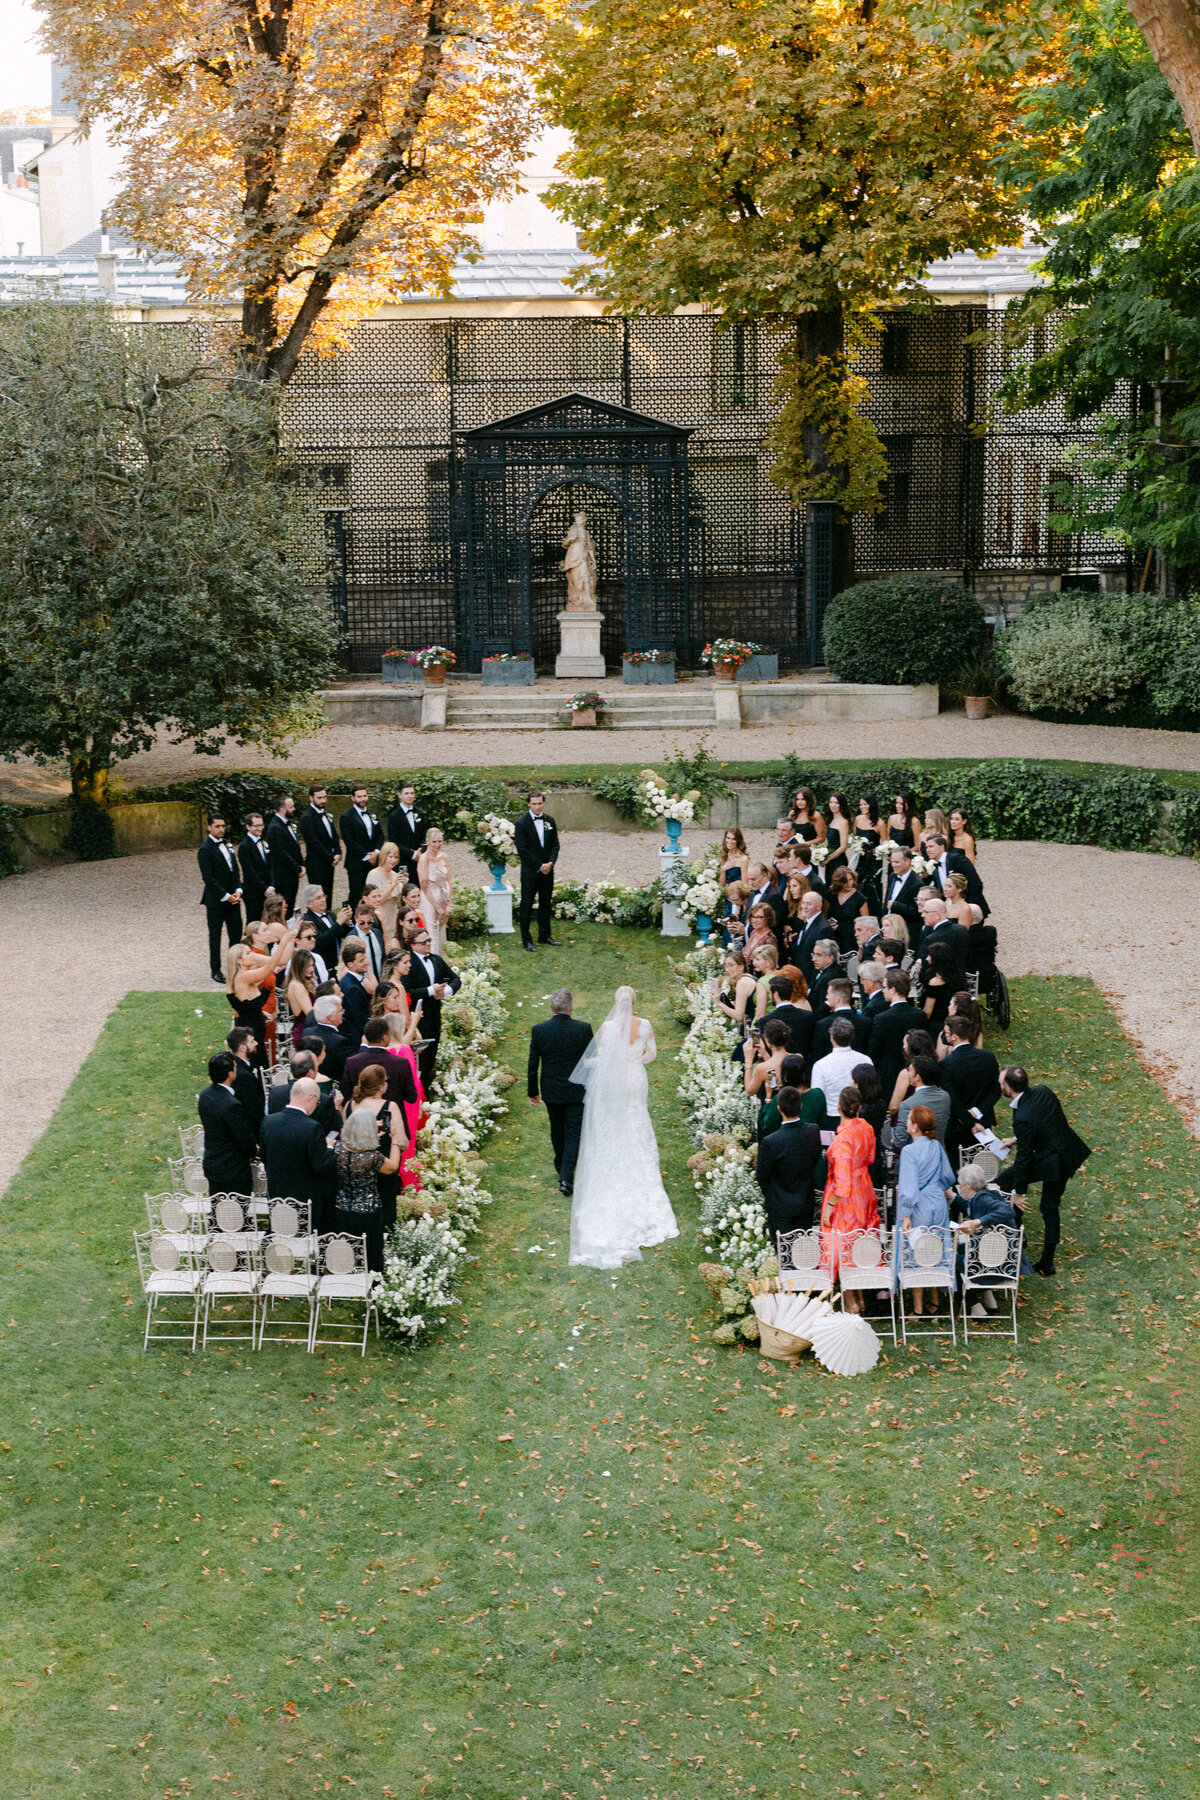 Jennifer Fox Weddings English speaking wedding planning & design agency in France crafting refined and bespoke weddings and celebrations Provence, Paris and destination wd512